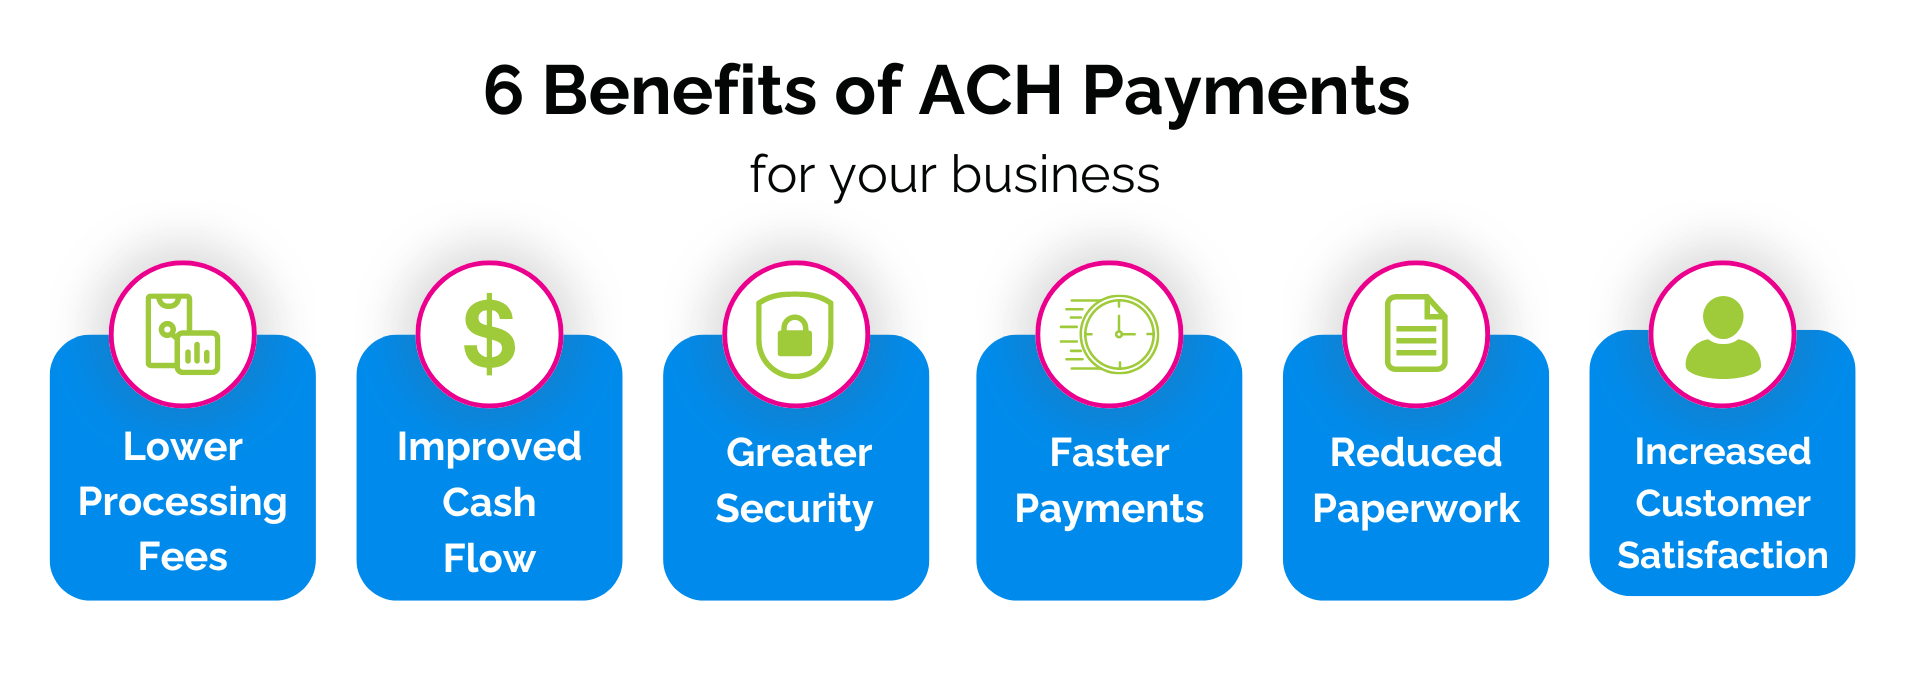 benefits of ach payments for your business infographic 